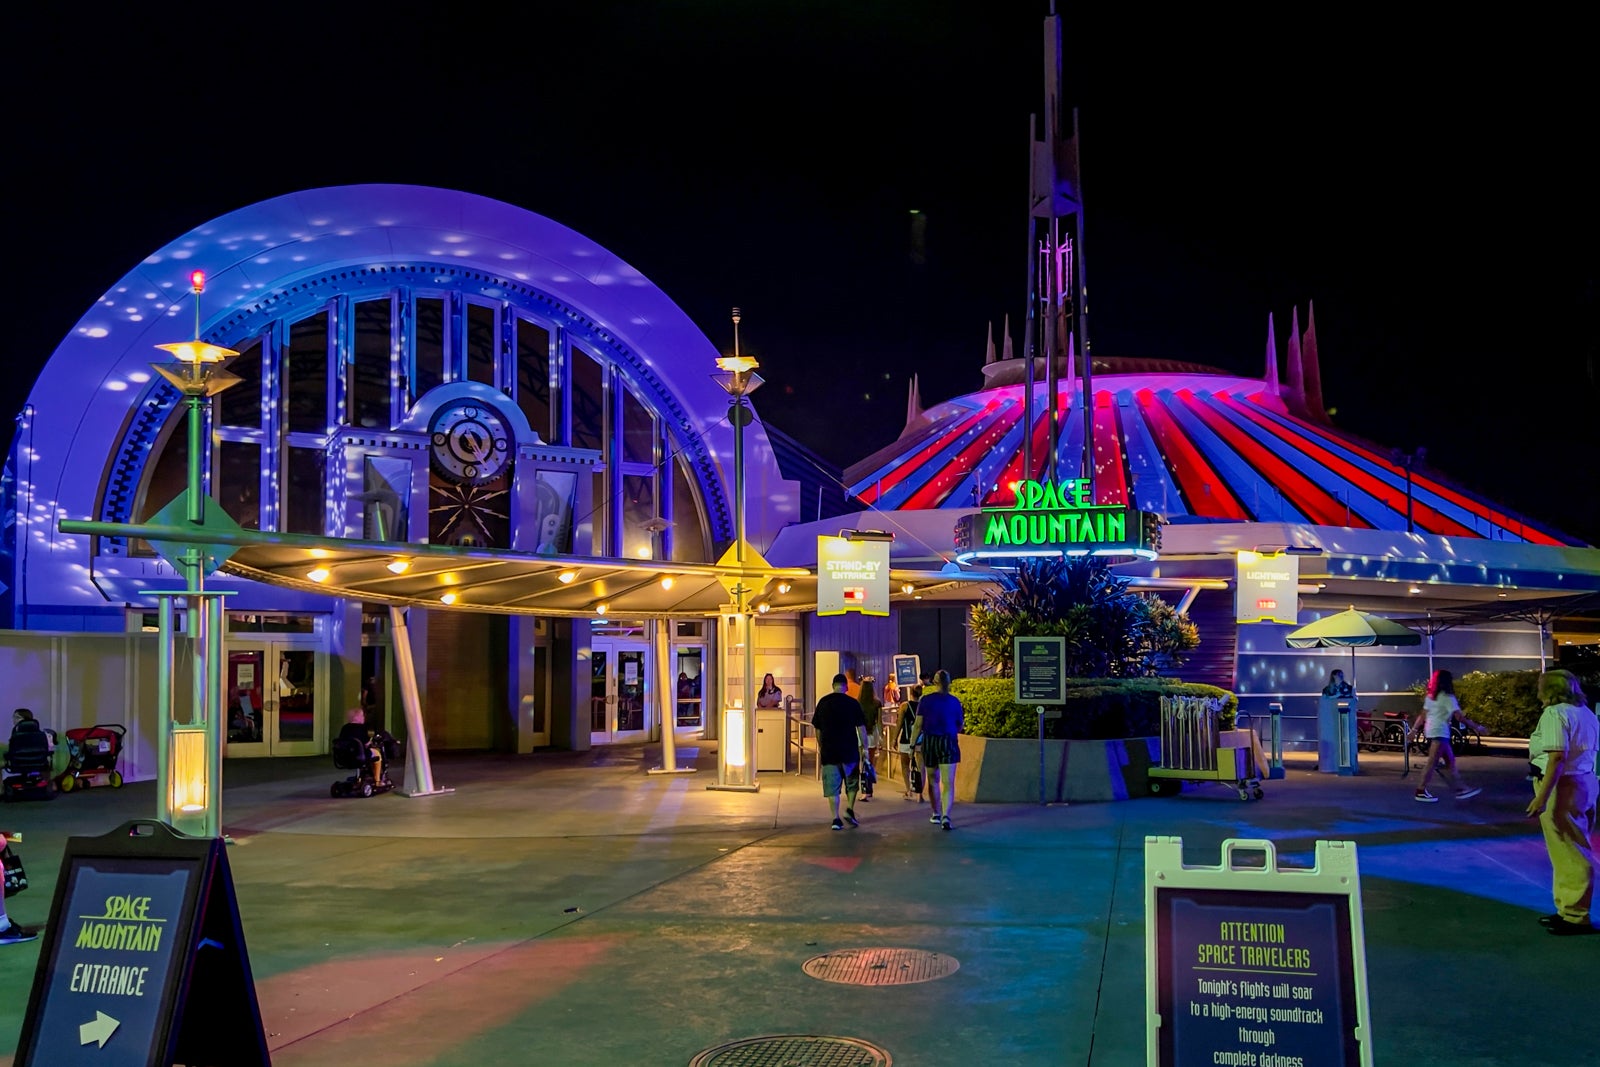 Space Mountain lit up for Halloween at Disney World